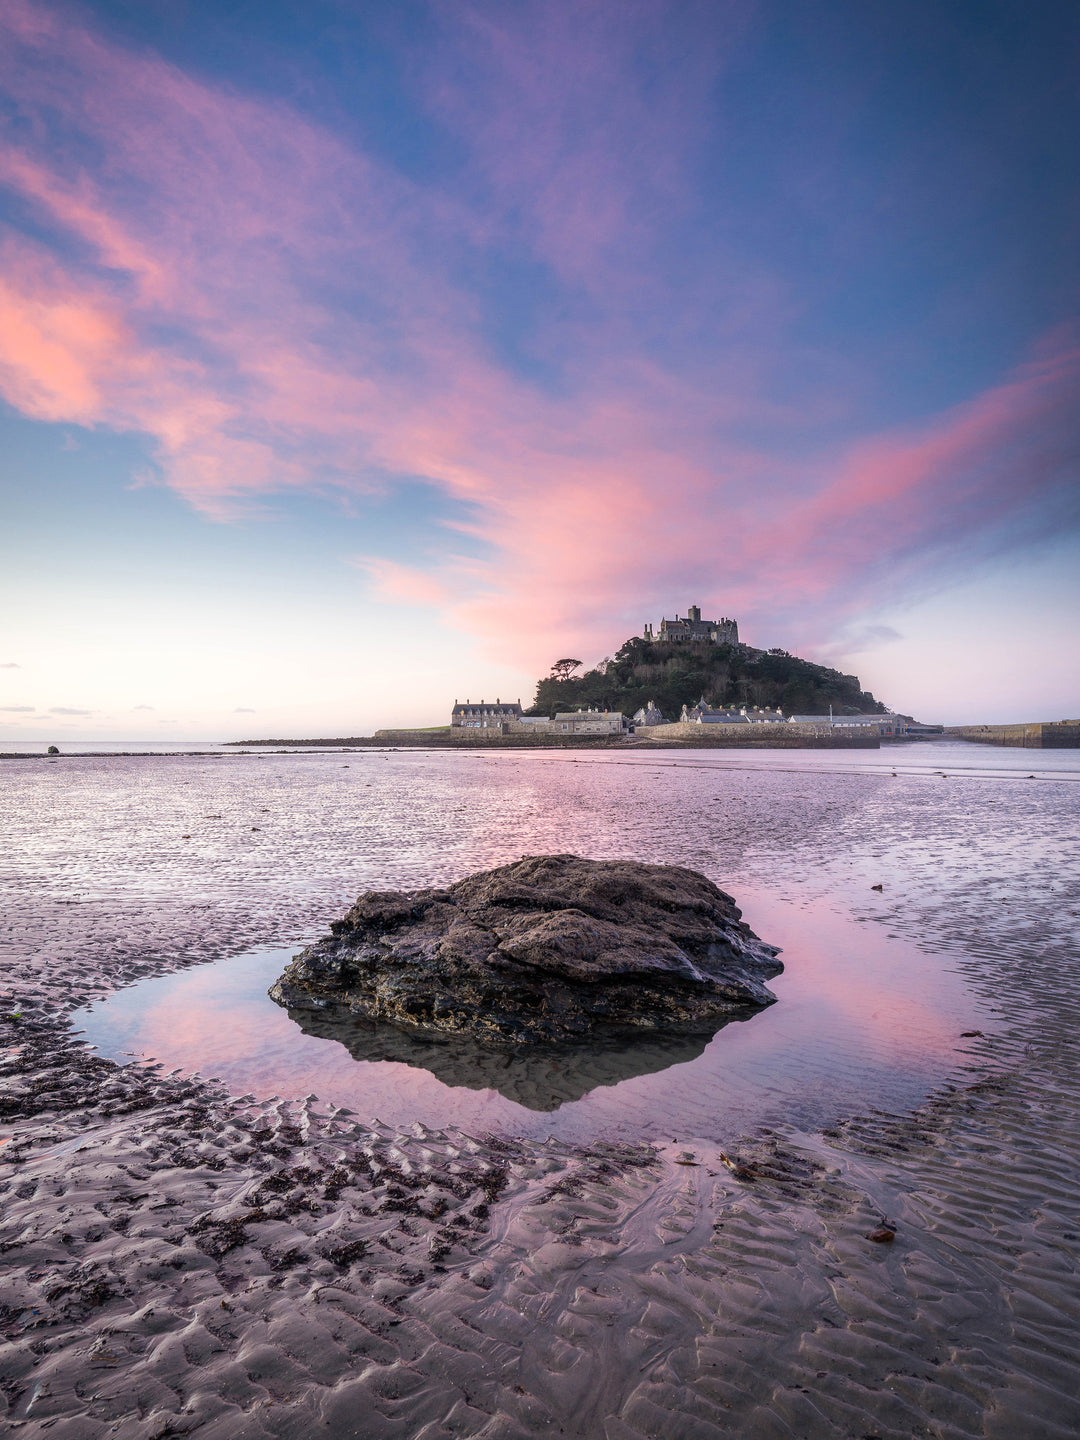 St. Michael's Mount in Cornwall at sunset Photo Print - Canvas - Framed Photo Print - Hampshire Prints